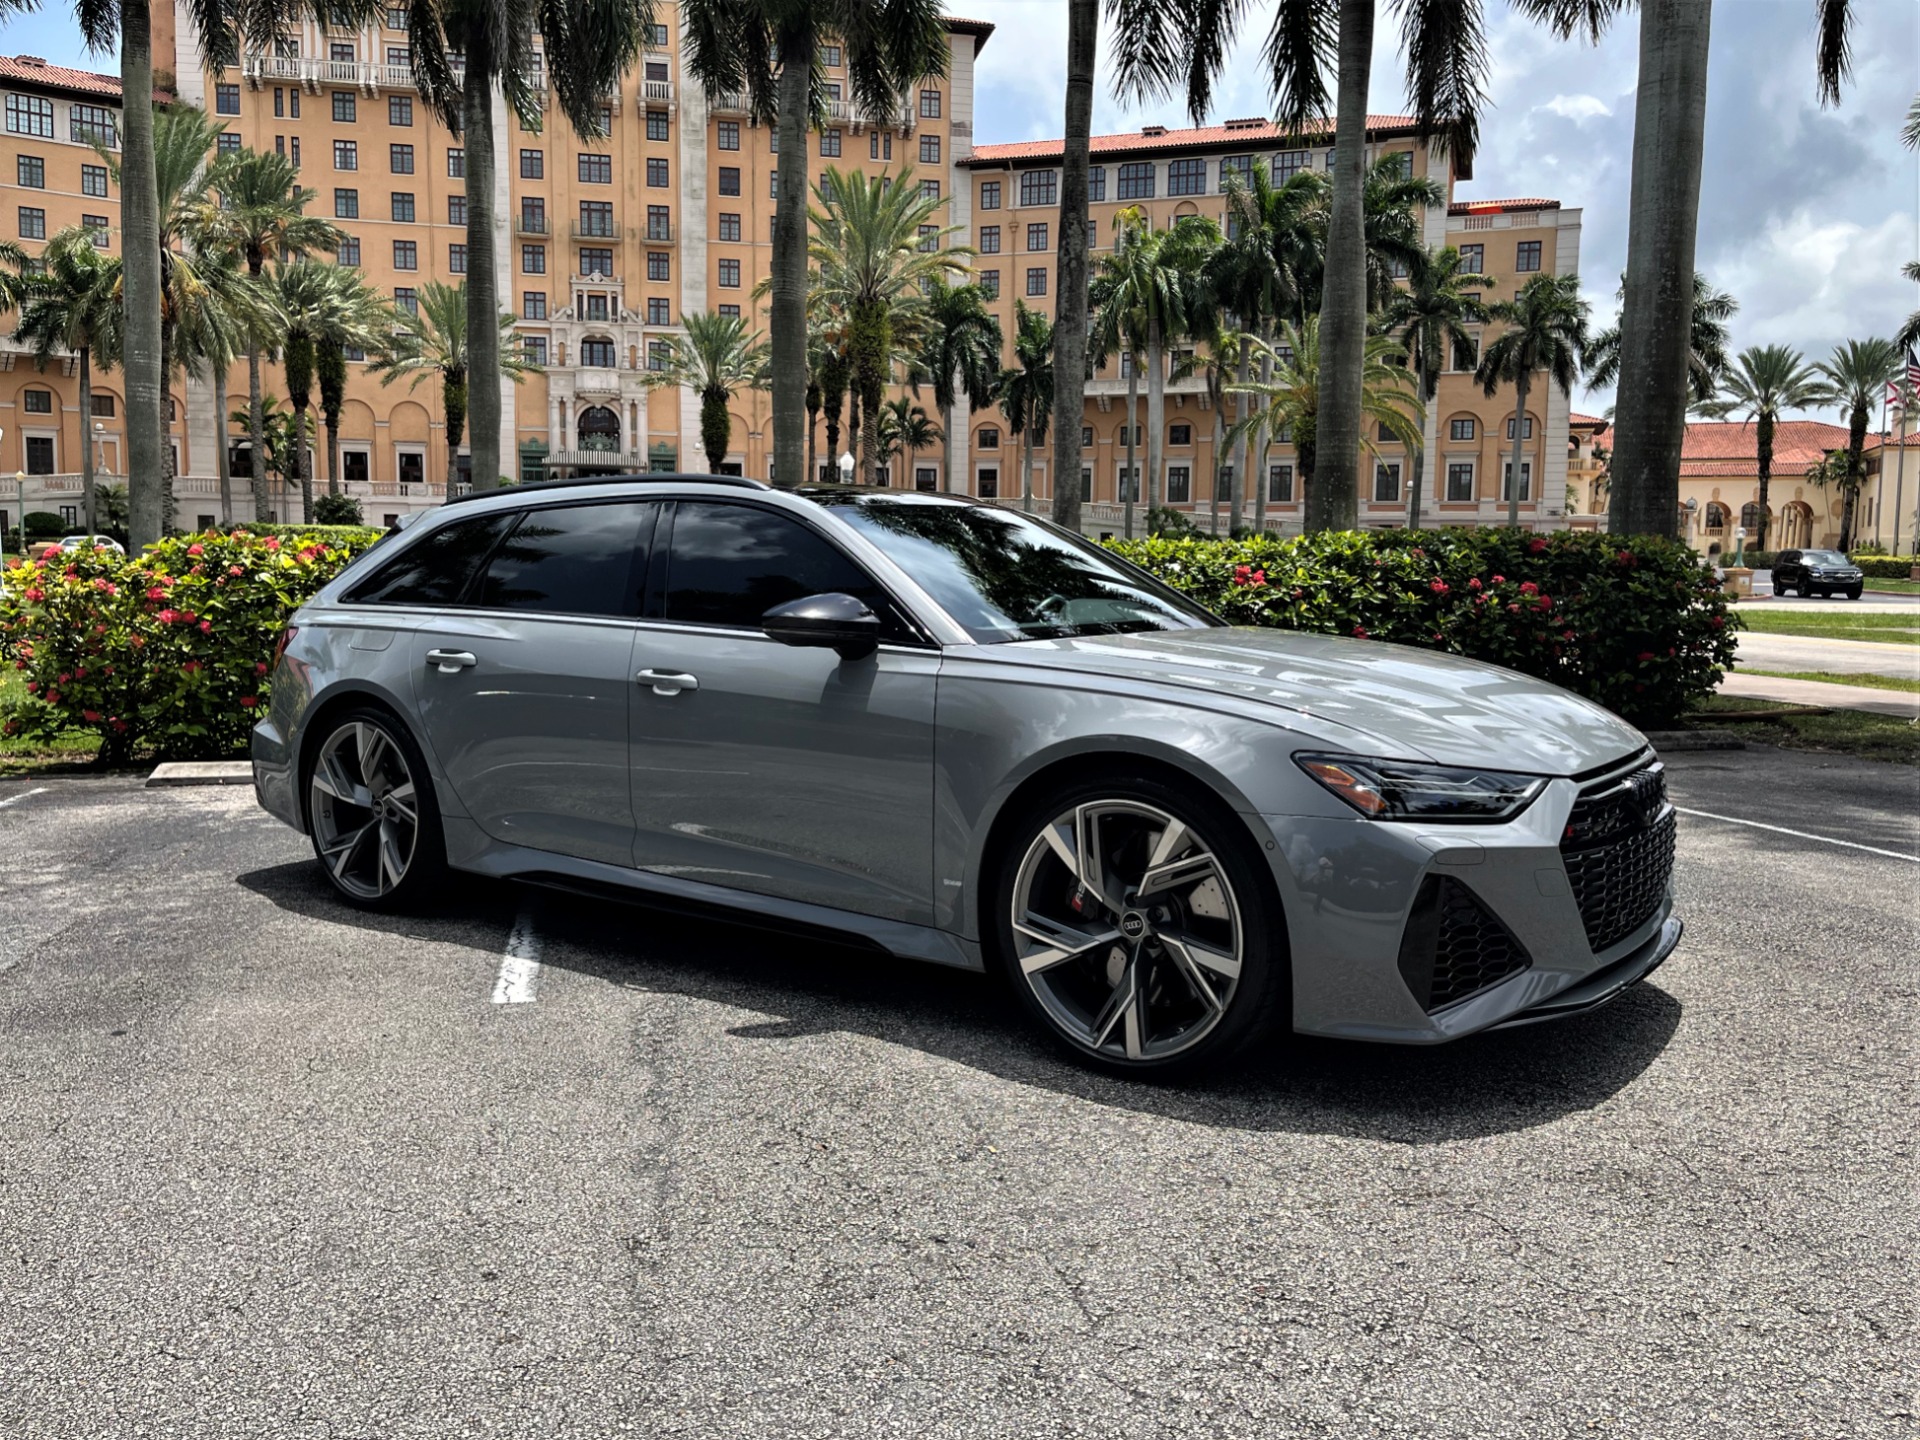 Used 2021 Audi RS 6 Avant 4.0T quattro Avant for sale $129,850 at The Gables Sports Cars in Miami FL 33146 3